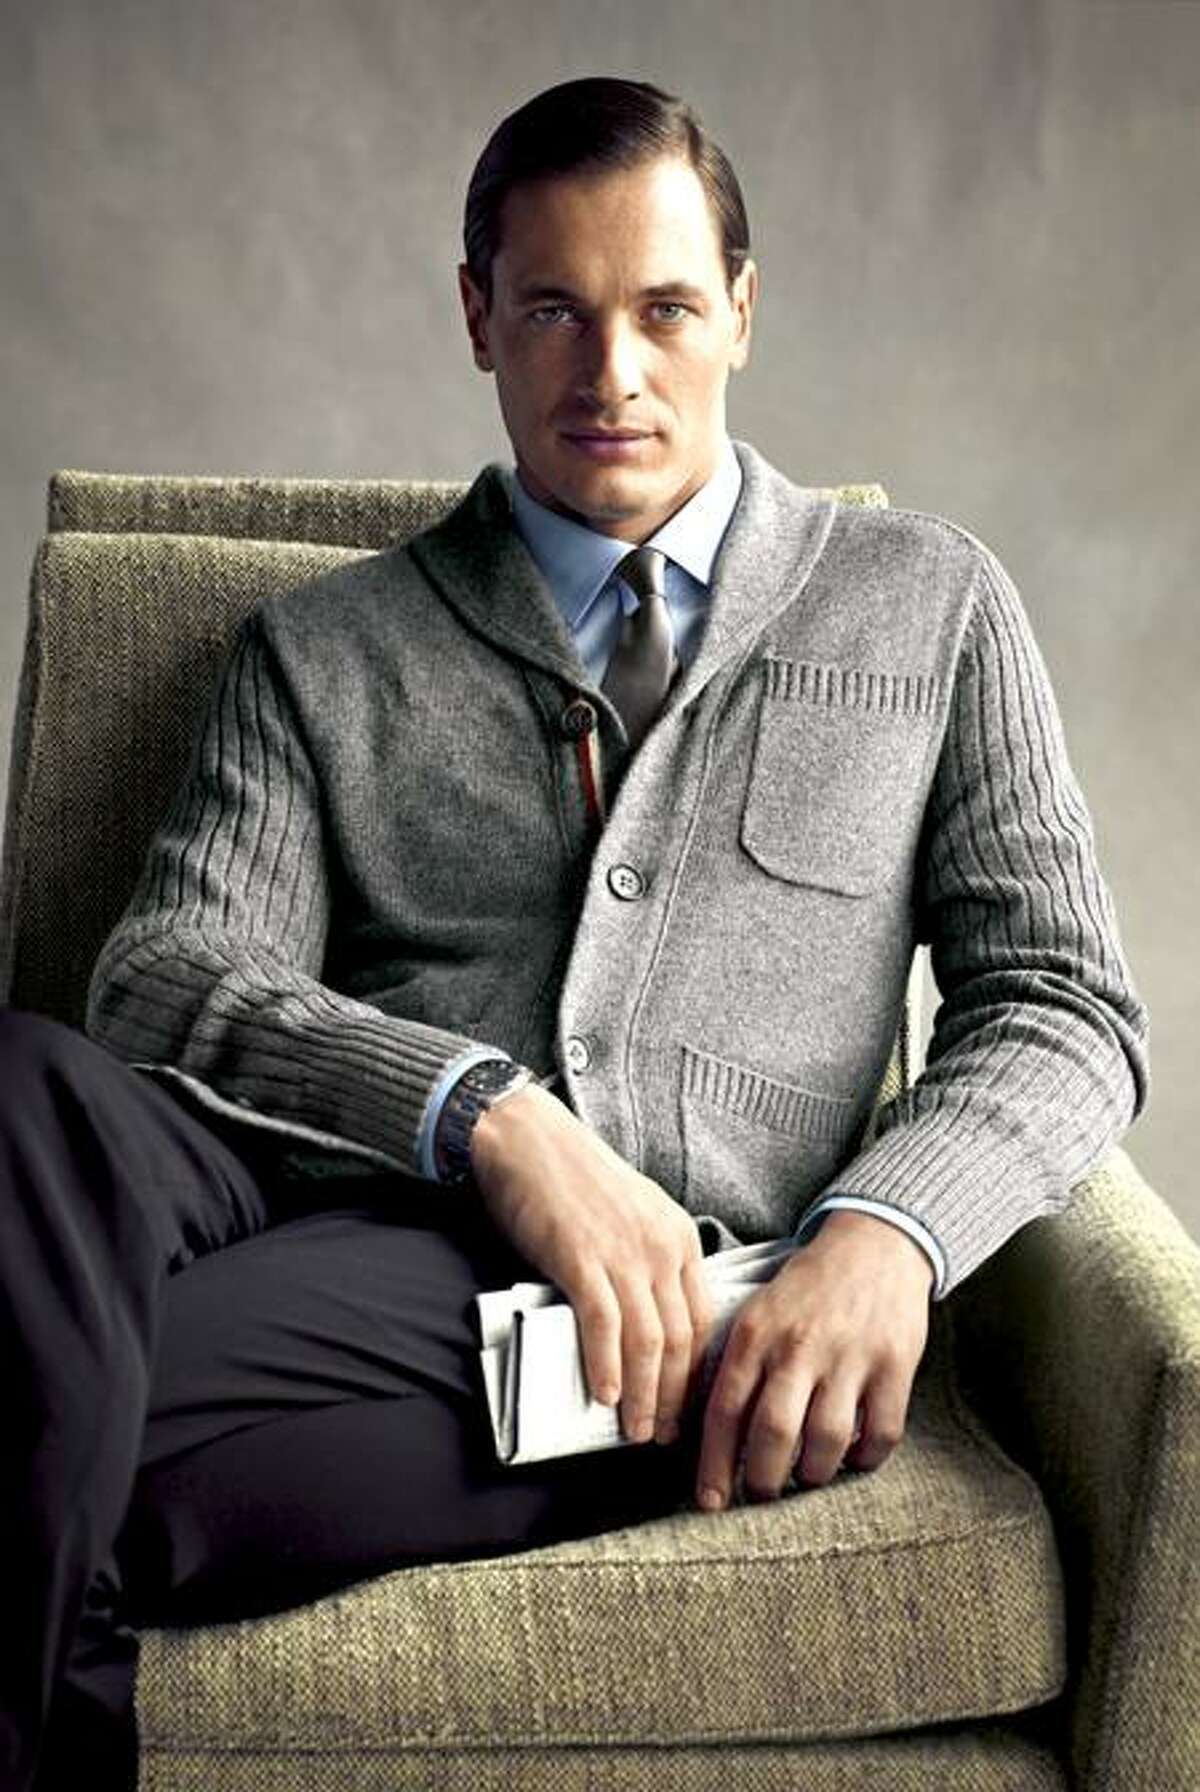 This product image courtesy of Banana Republic shows a men's design from Banana Republic's Mad Men Collection. "Mad Men" has gone beyond a fashion fad. The AMC show about a 1960s ad agency that counts its clothes as an additional character continues to influence runways and retailers, including its own branded collection debuting next week at Banana Republic. (AP Photo/Banana Republic)